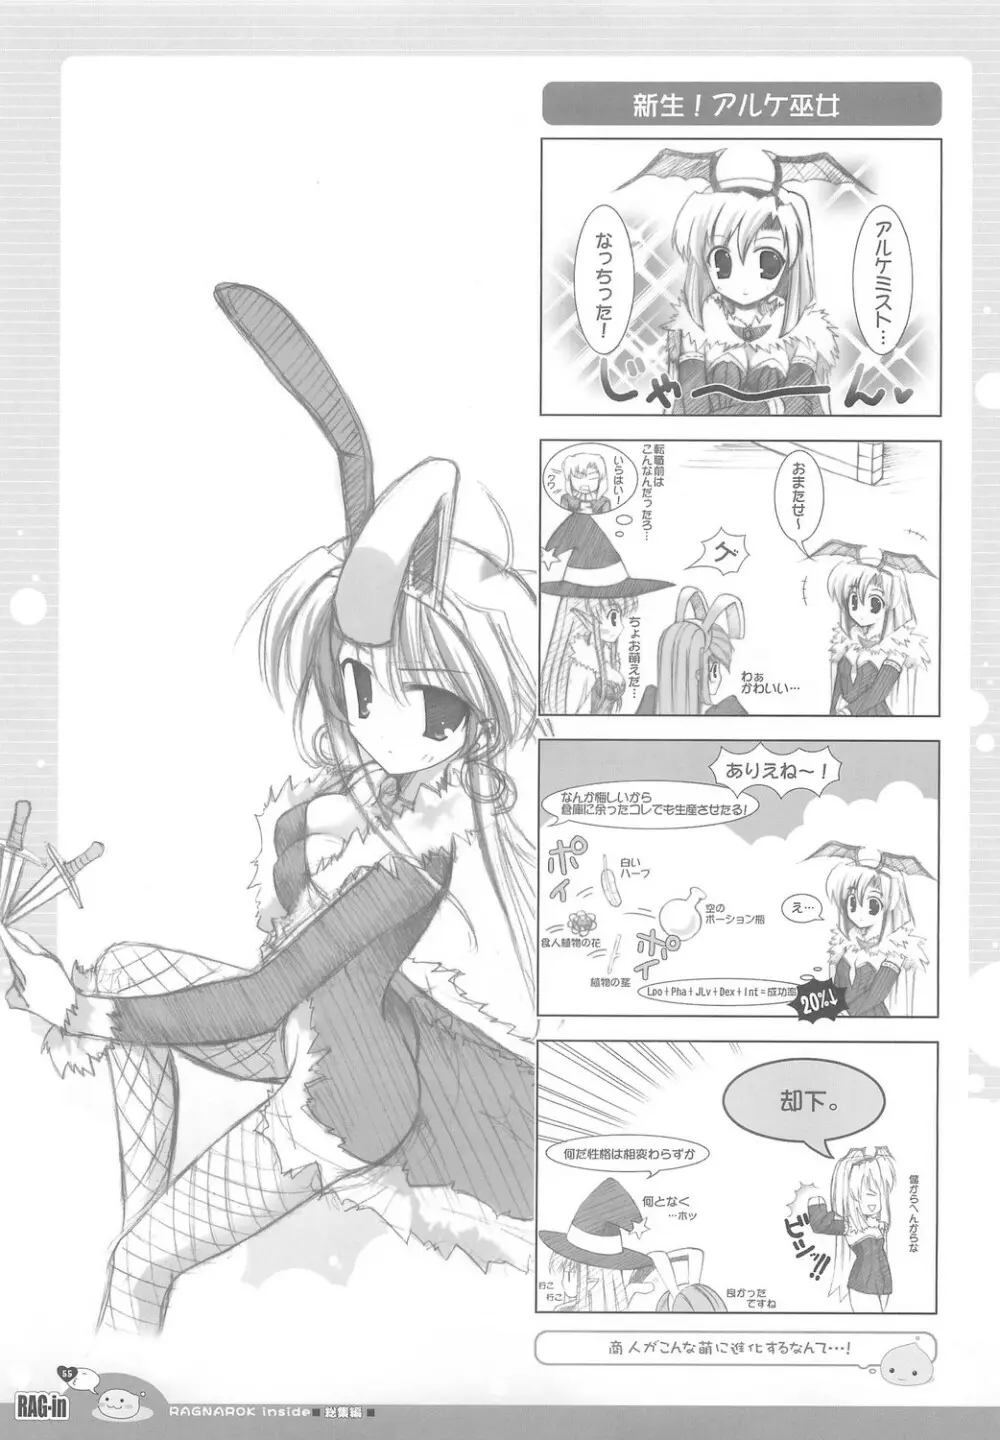 RAG-in 1～10 総集編 Page.59